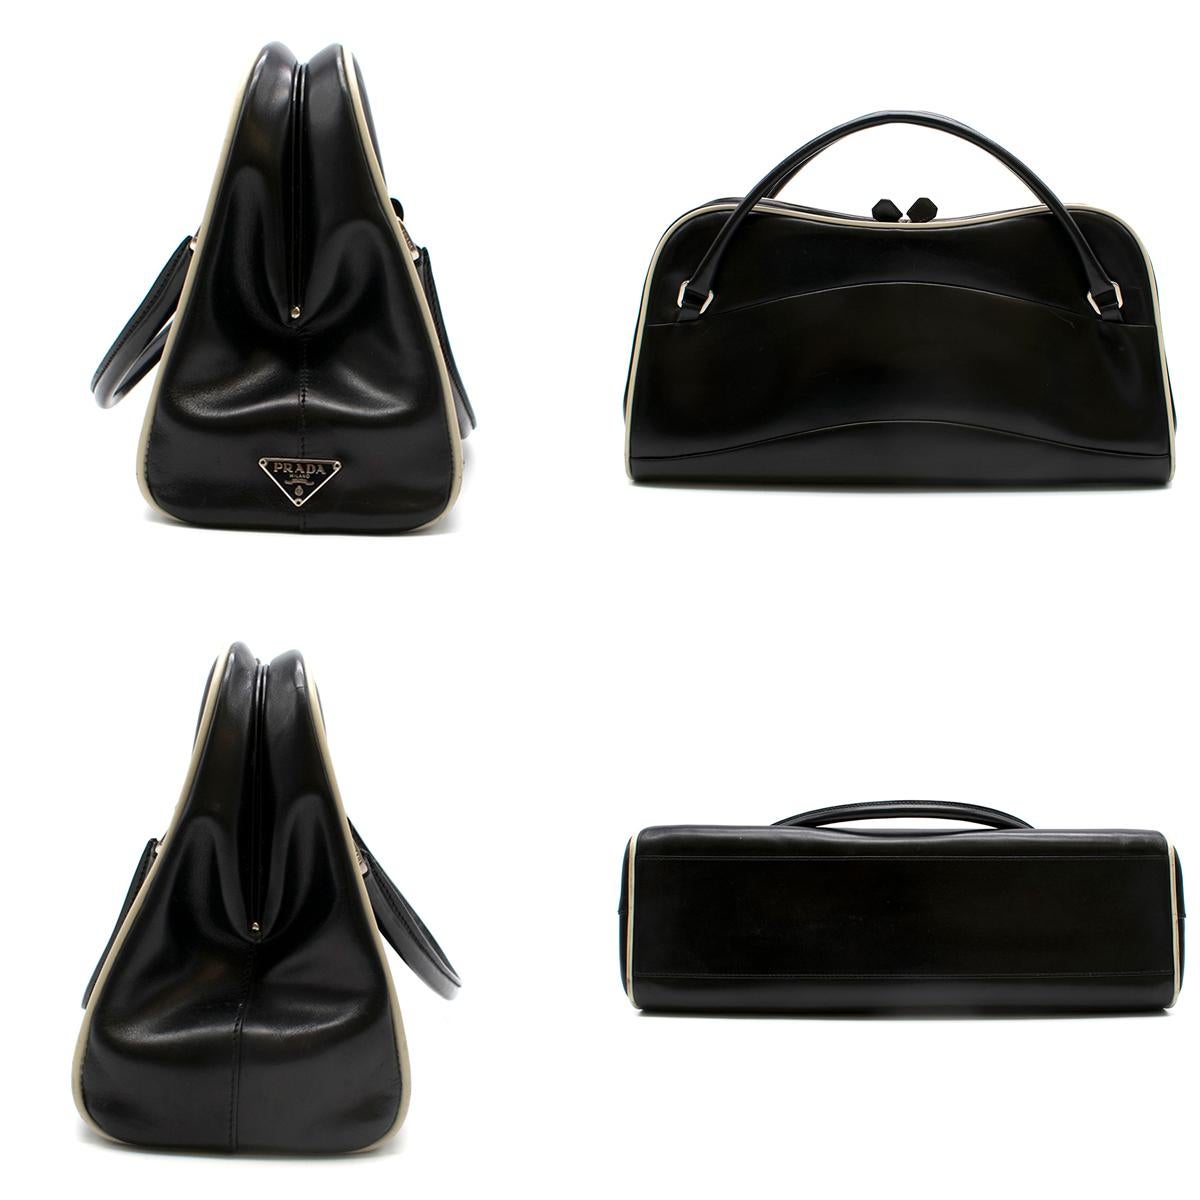 Prada Vintage Black Polished Leather Medium Handle Bag 

- Smooth leather material
- Fine leather white lining 
- Wide handle for better grip 
- Half frame fringe with a open/close clasp 
- Interior zip
- Fine interior material

Please note, these